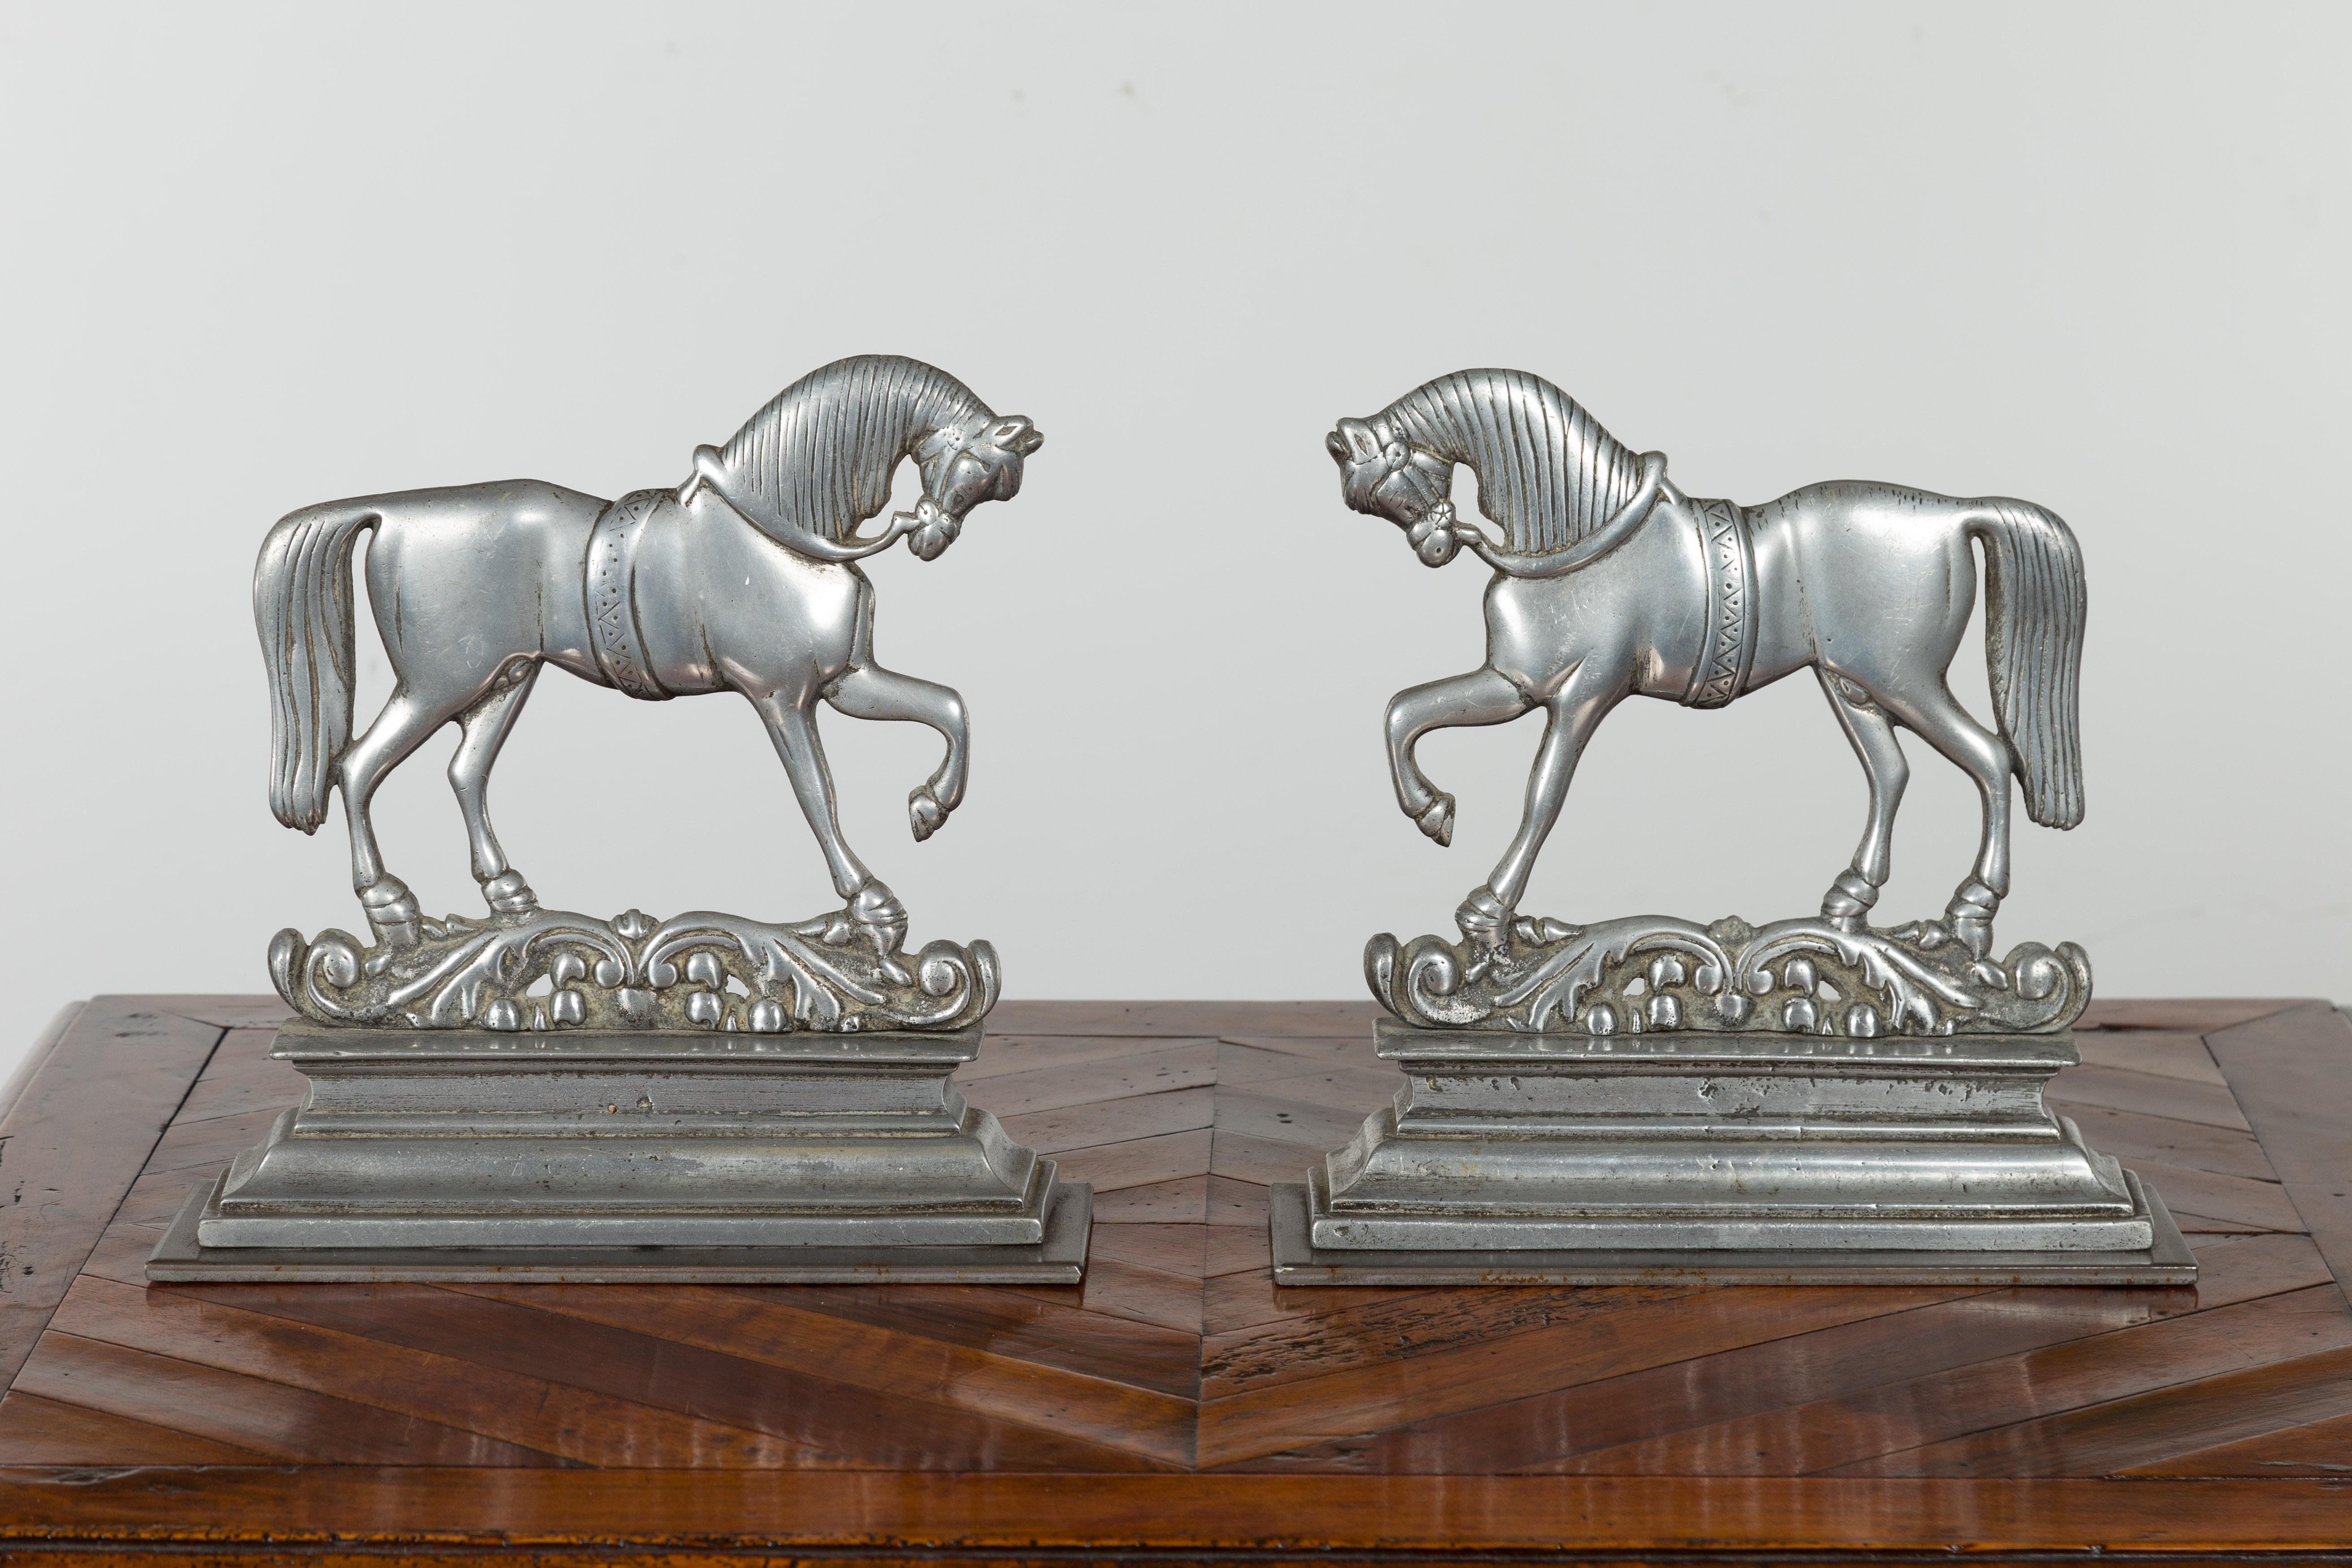 20th Century Pair of English Turn of the Century Metal Bookends Depicting Prancing Horses For Sale